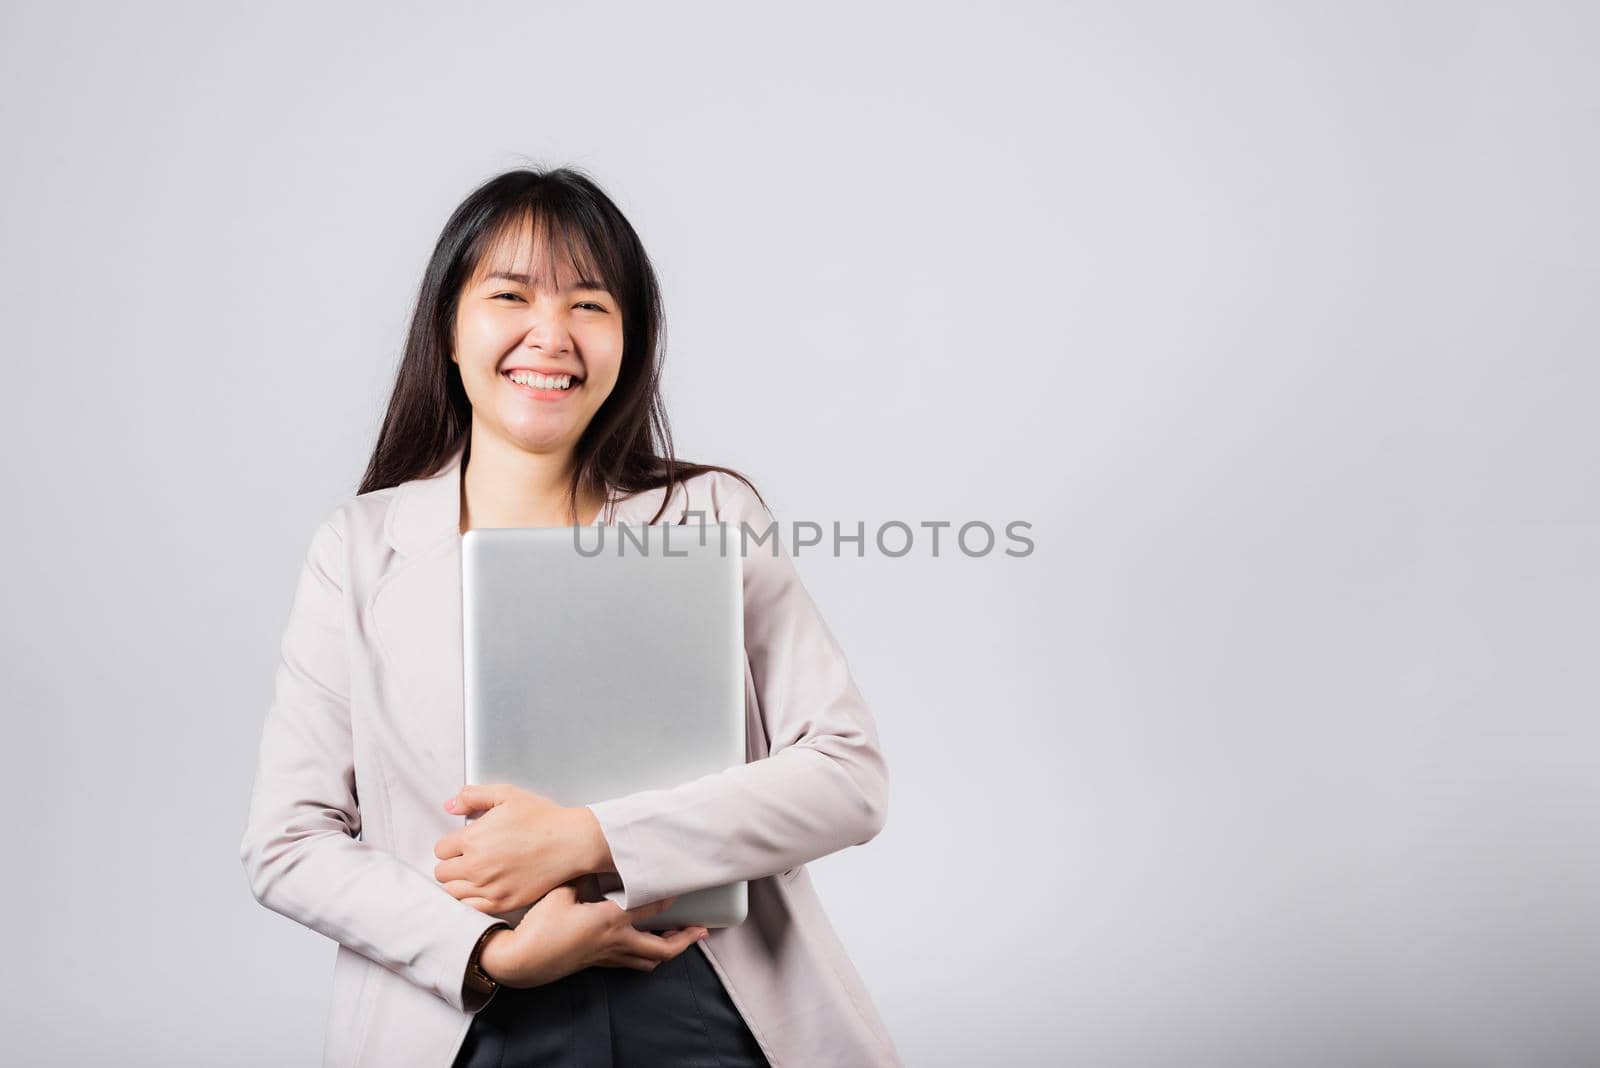 Front view woman smiling confident smiling holding closed laptop, Portrait excited happy Asian young female person hugging close cover computer device studio shot isolated on white background